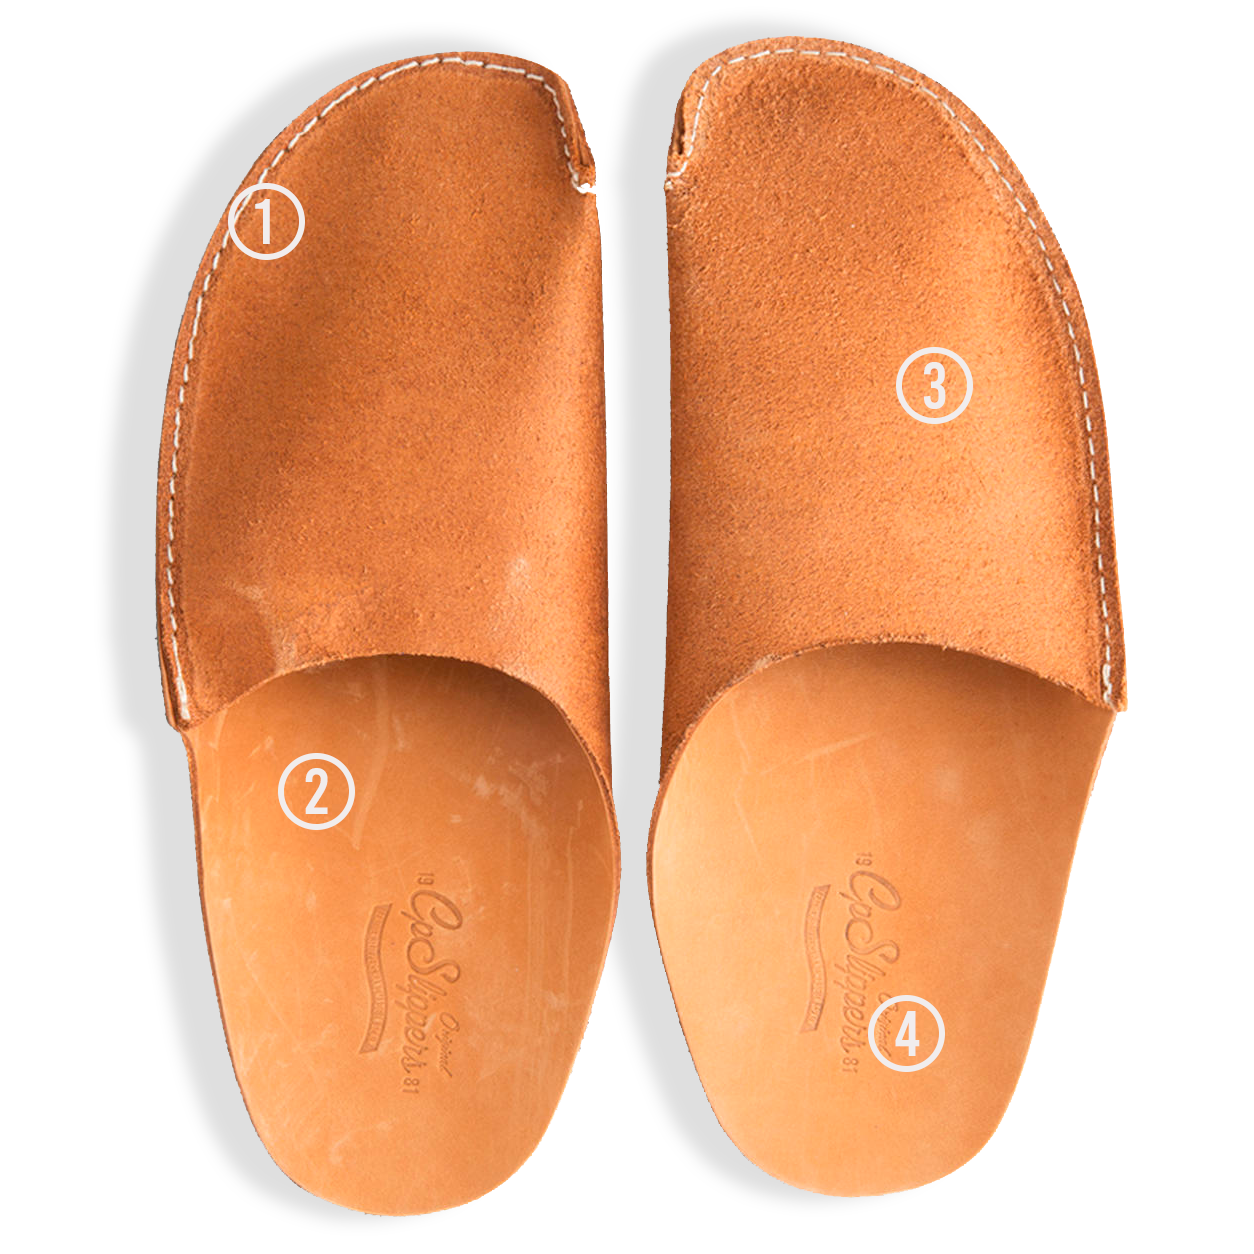 What sets our slippers home shoes apart? See Minimalist Leather Slippers